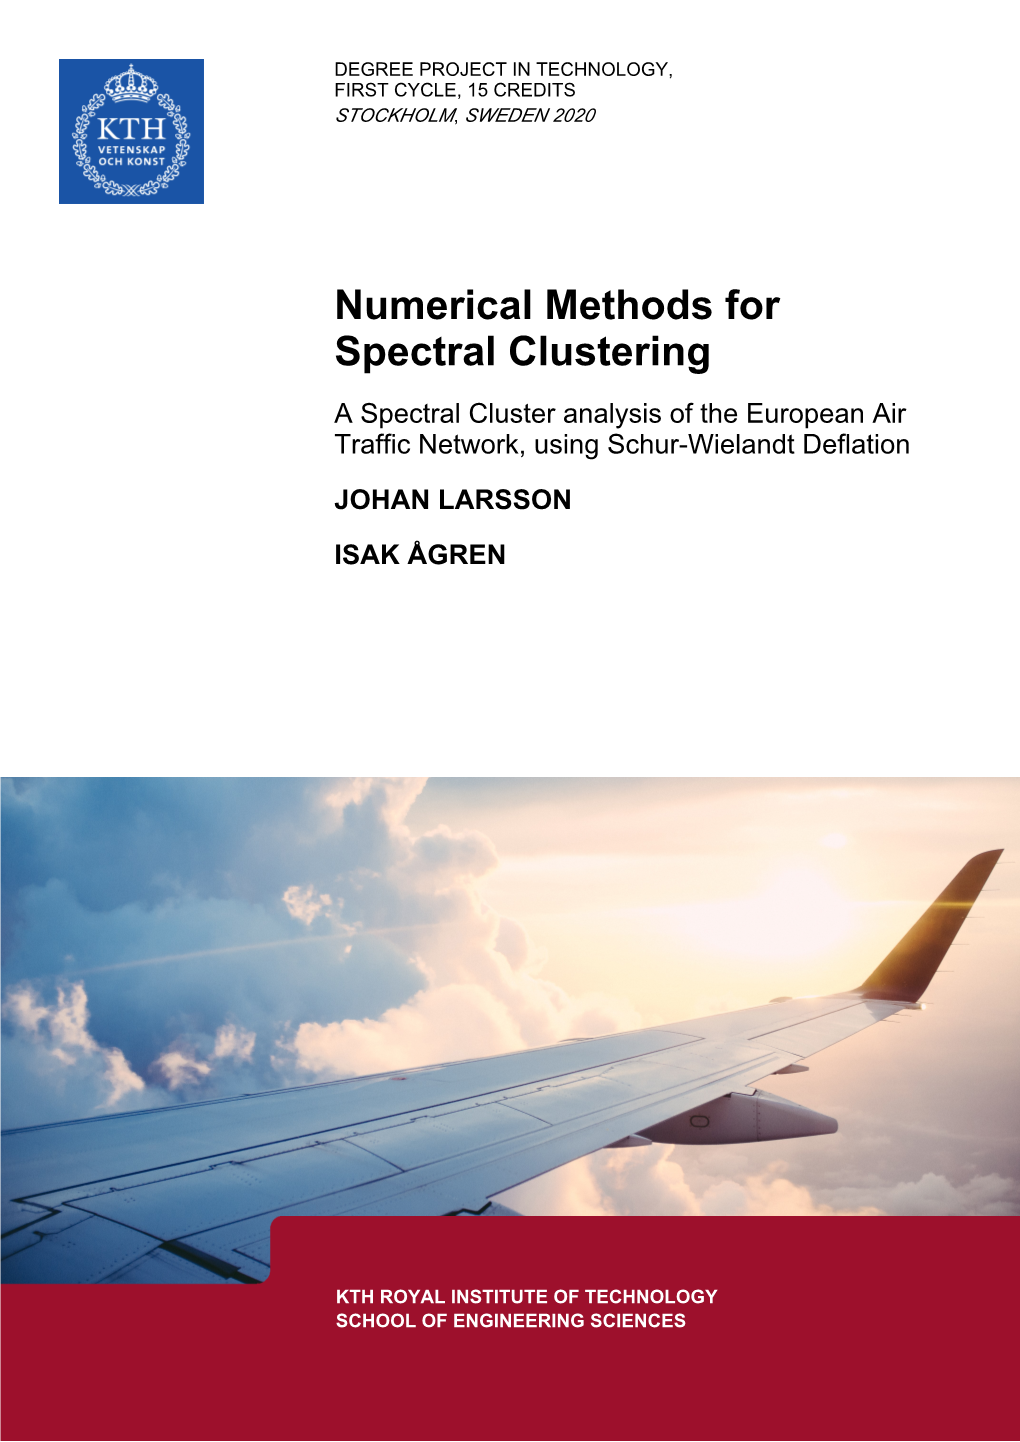 Numerical Methods for Spectral Clustering a Spectral Cluster Analysis of the European Air Traffic Network, Using Schur-Wielandt Deflation